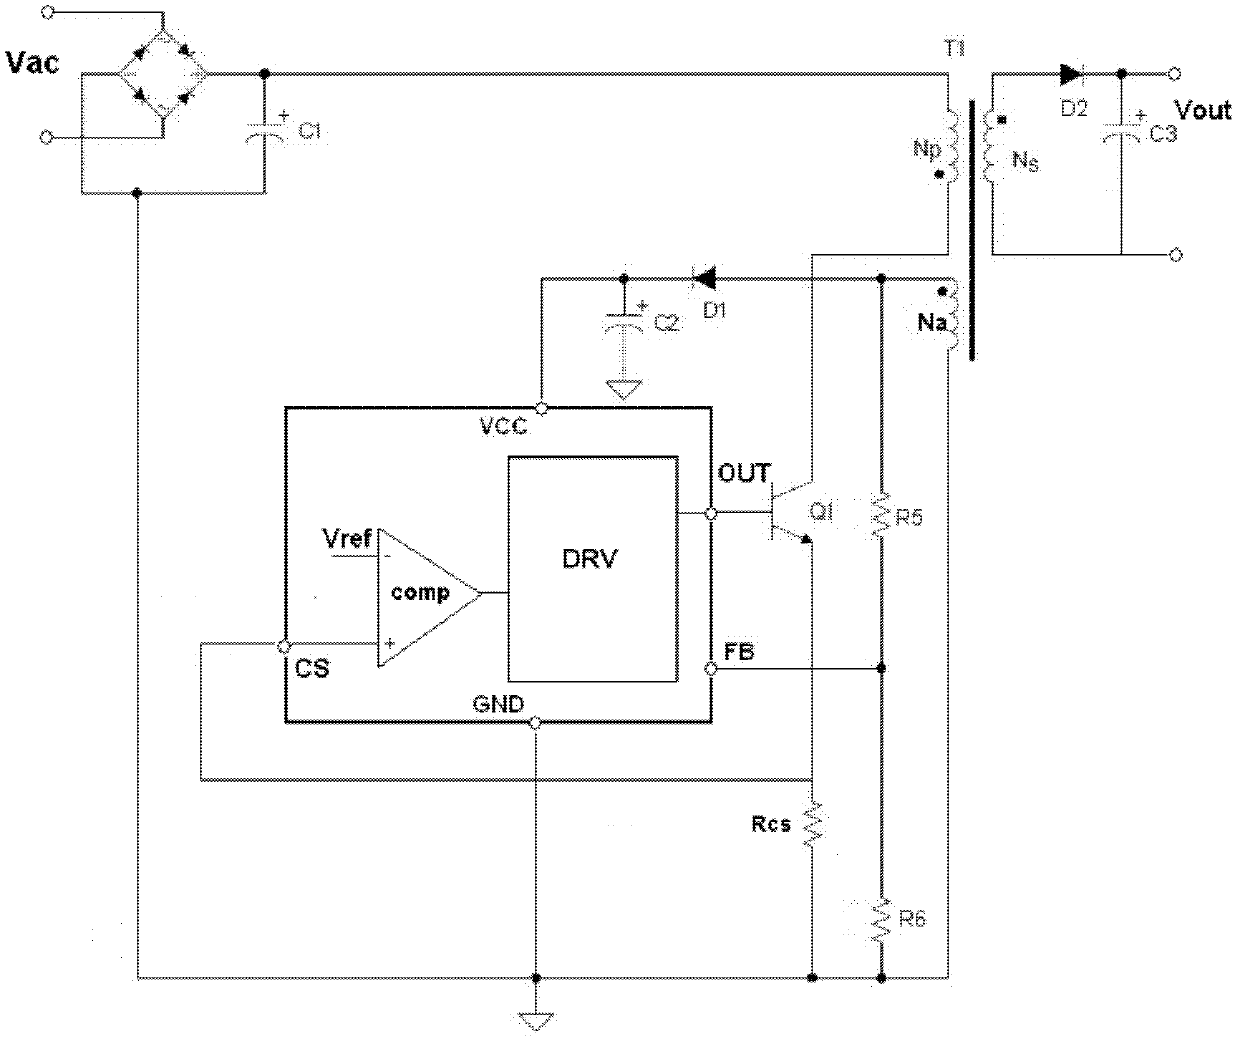 Voltage compensation circuit of switch power line